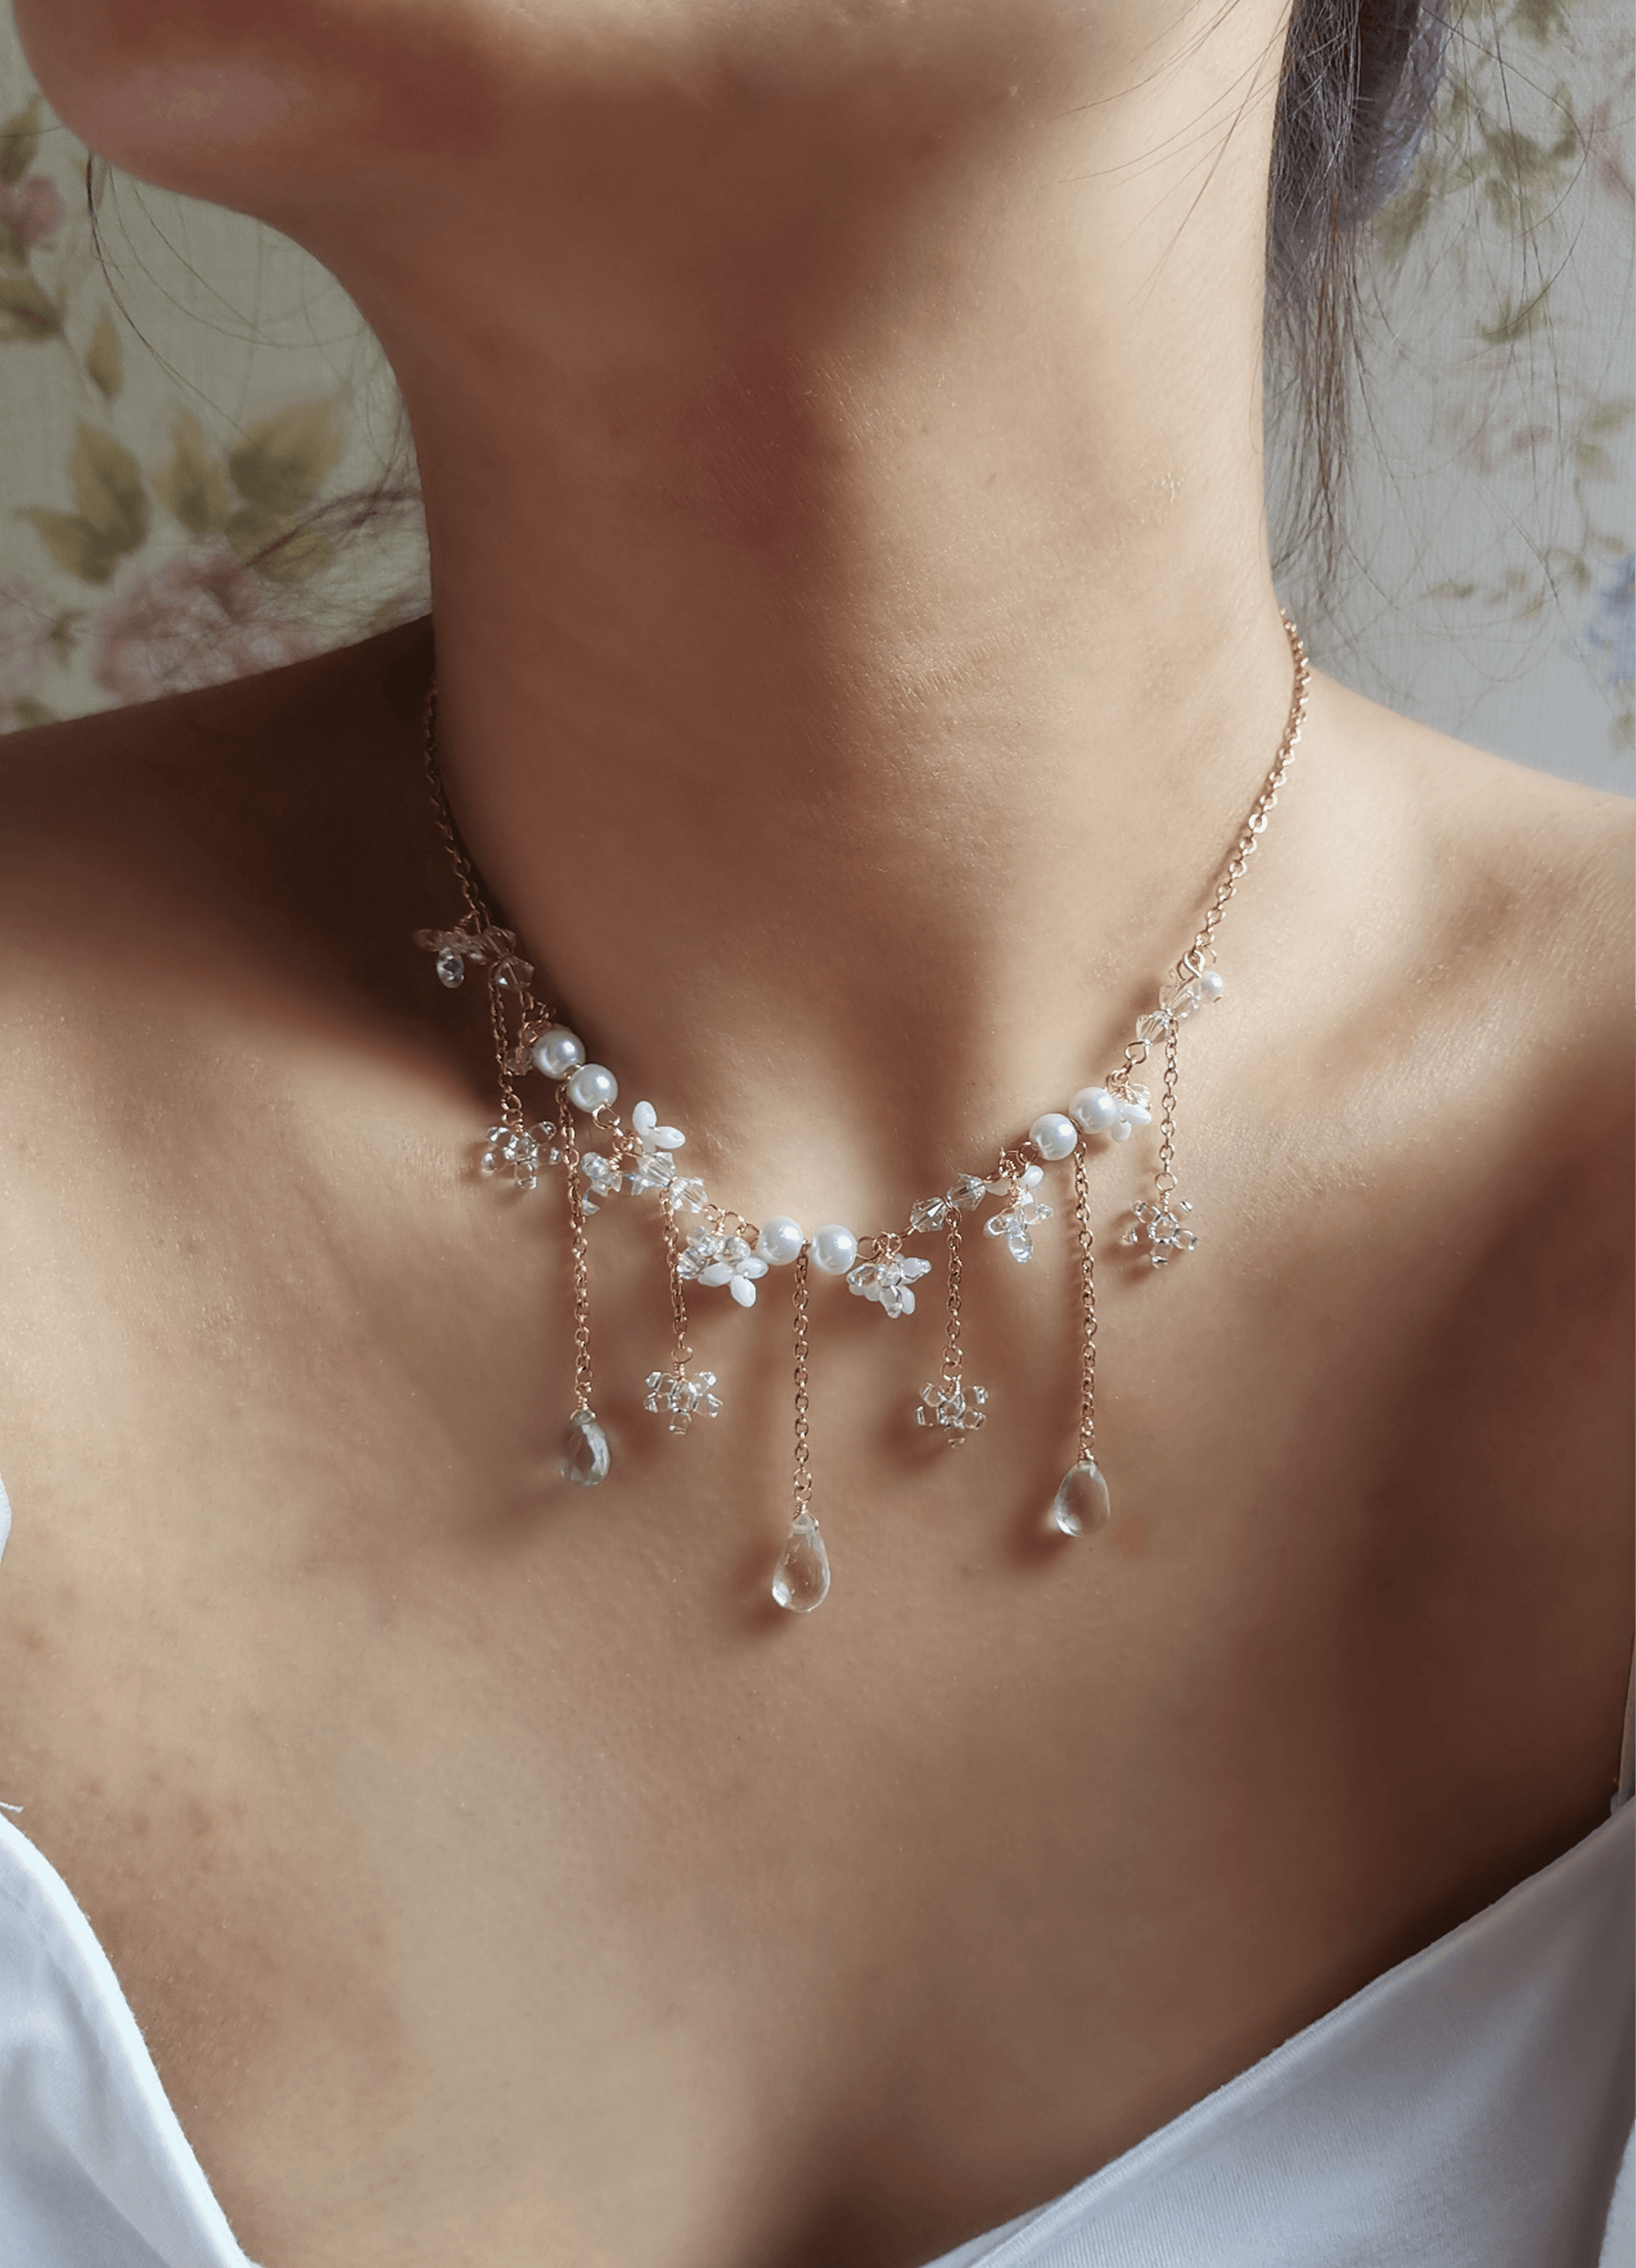 Snowflake Drops Necklace - By Cocoyu